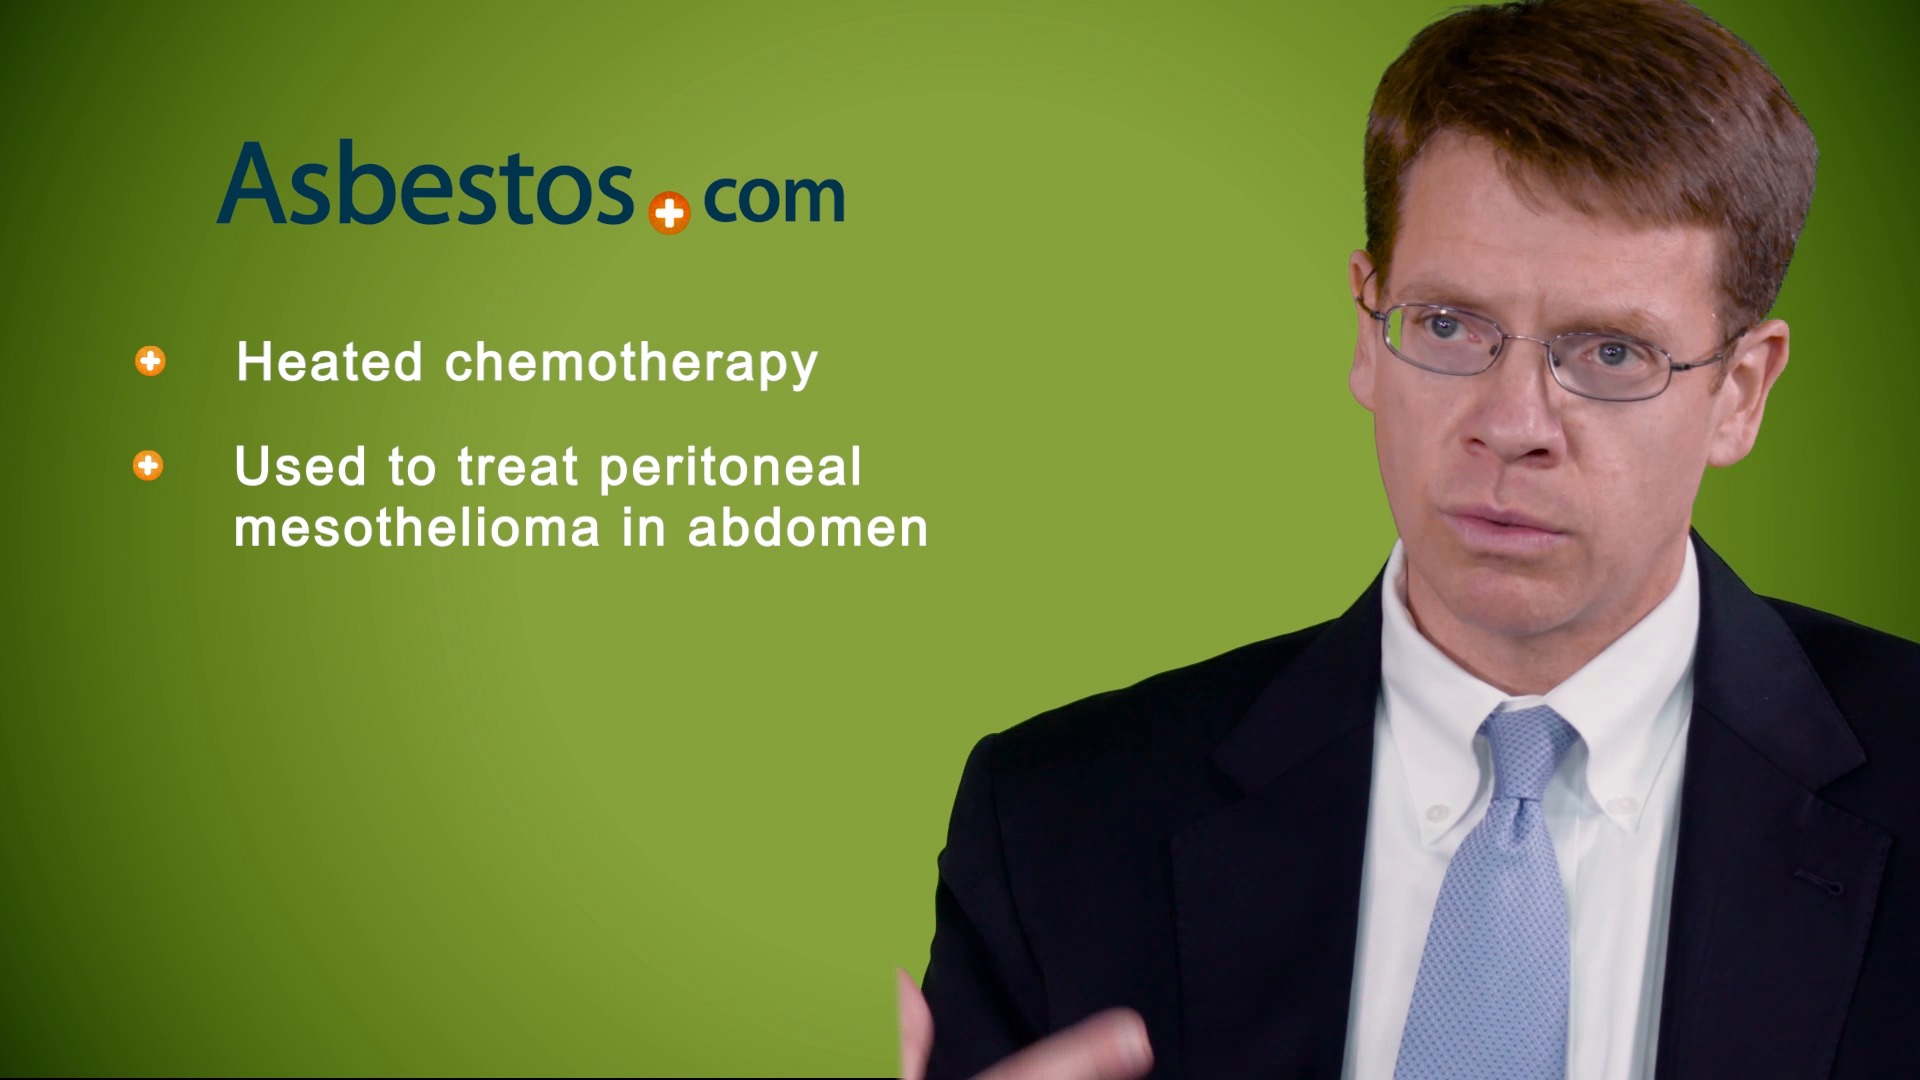 What is hypothermic intraperitoneal chemotherapy (HIPEC) and how does it work?